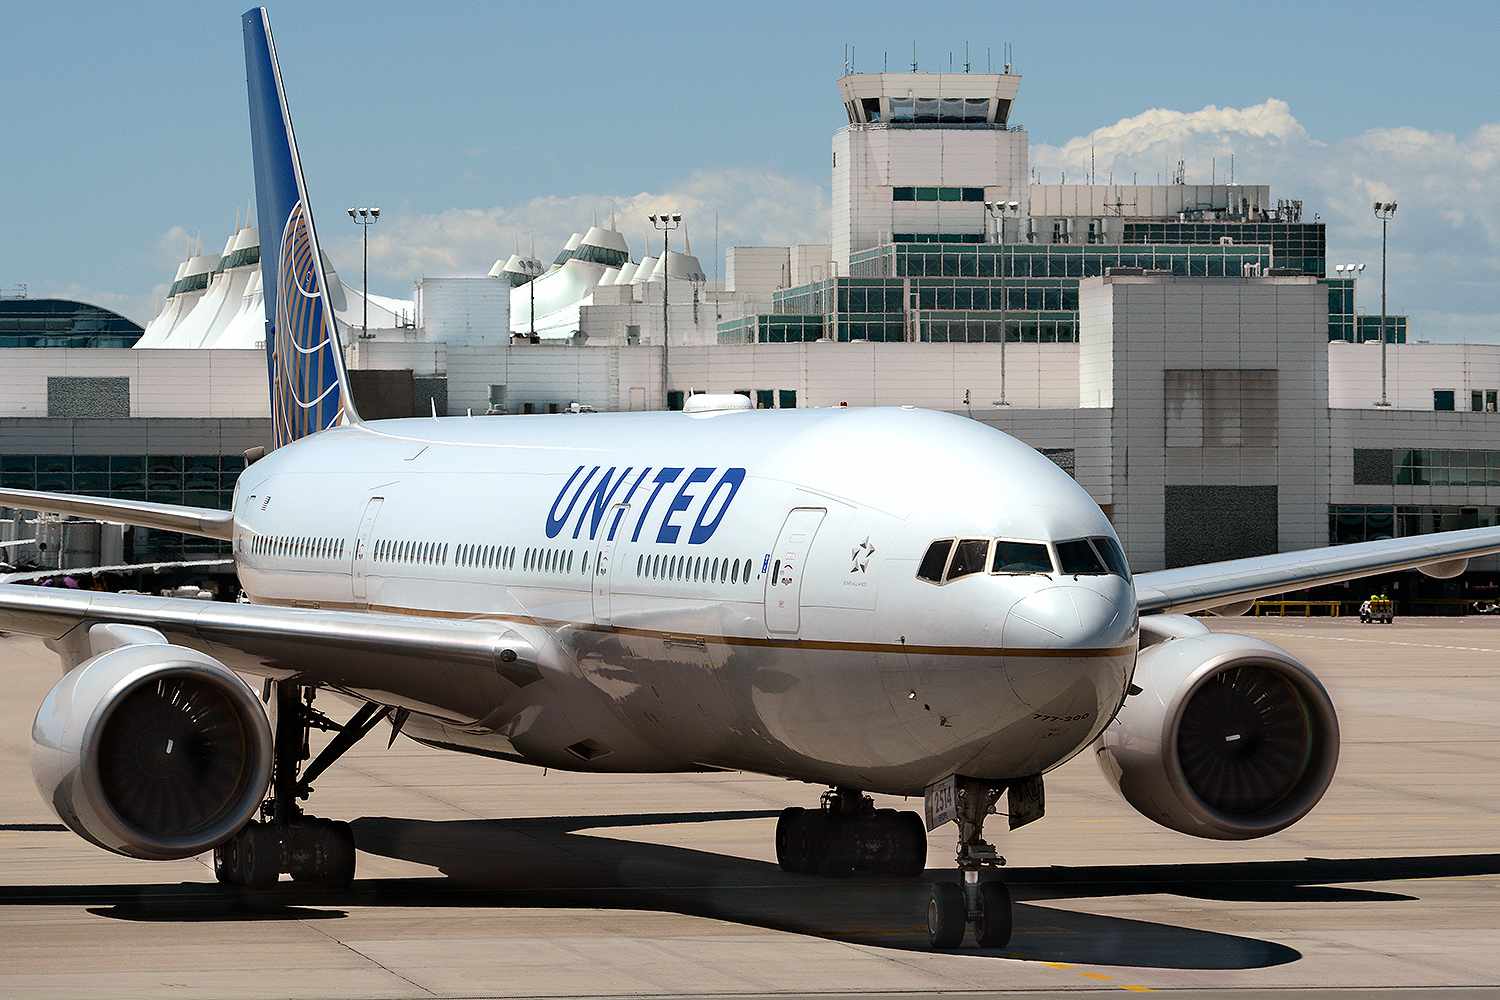 United Airlines' safety protocols questioned (Credits: People)